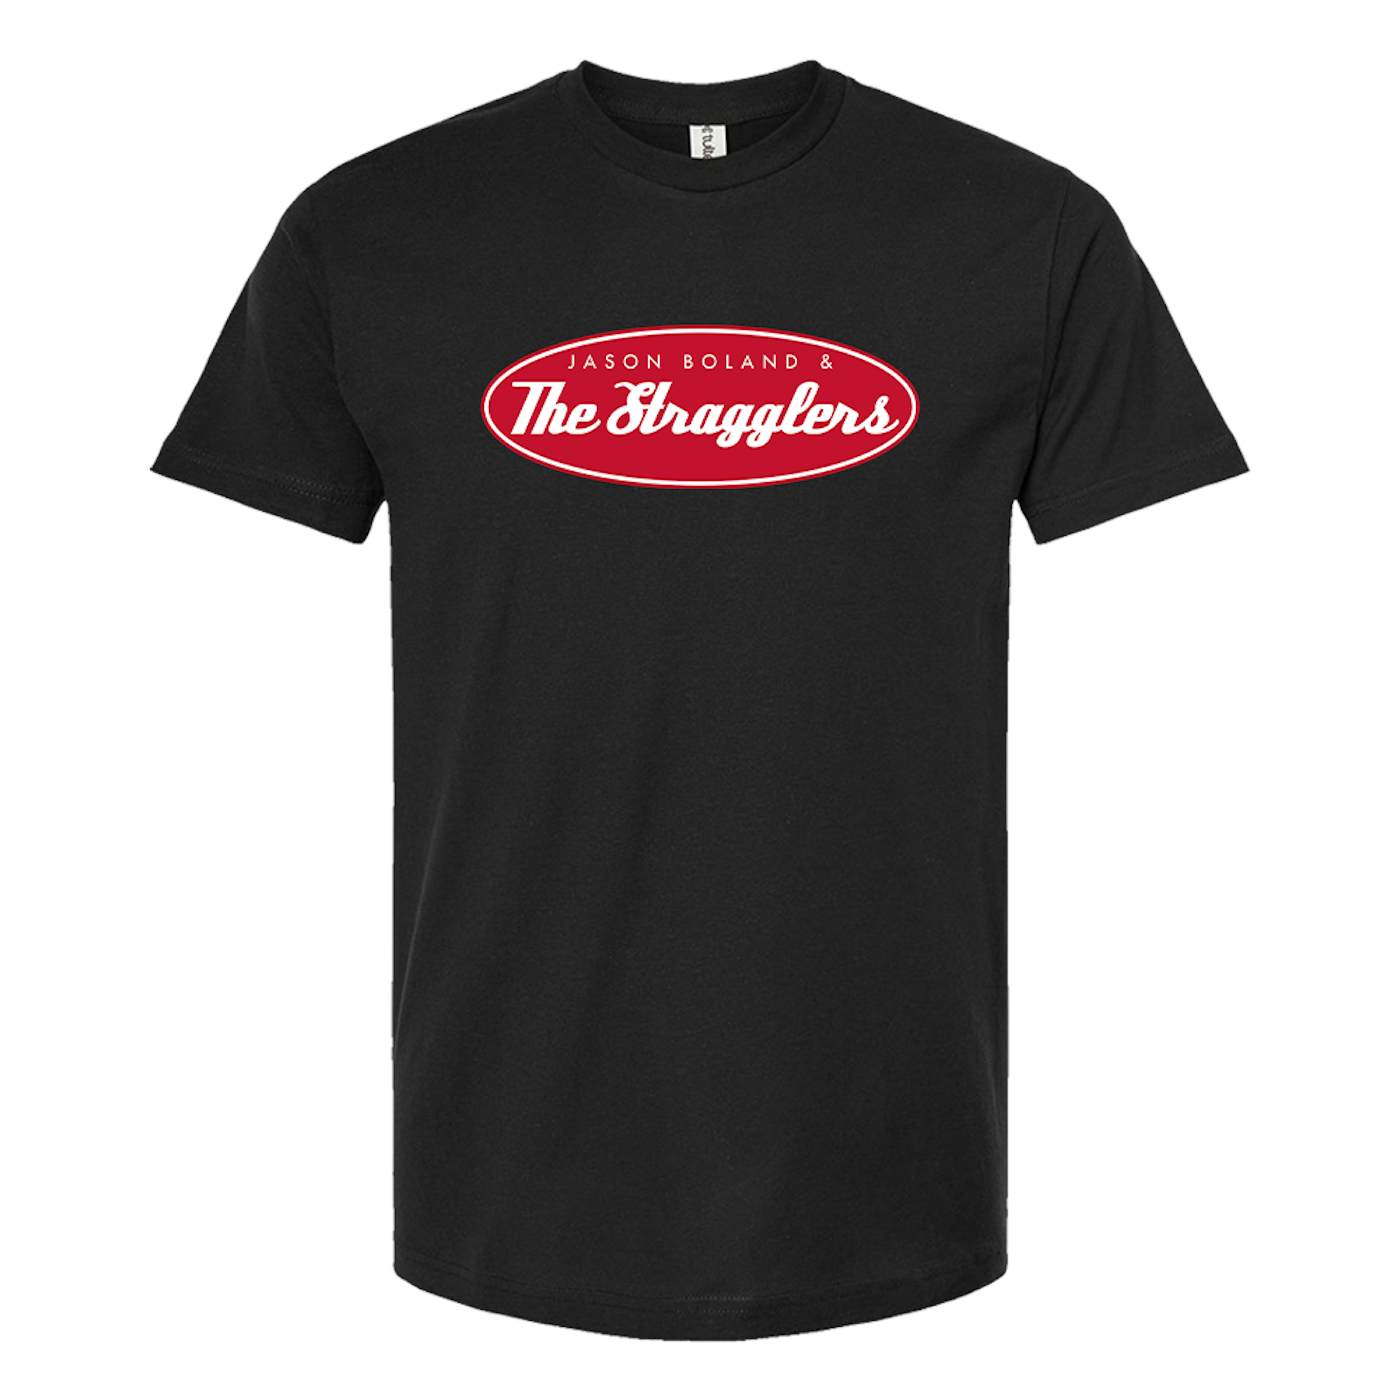 Jason Boland & The Stragglers Red Sign Tee